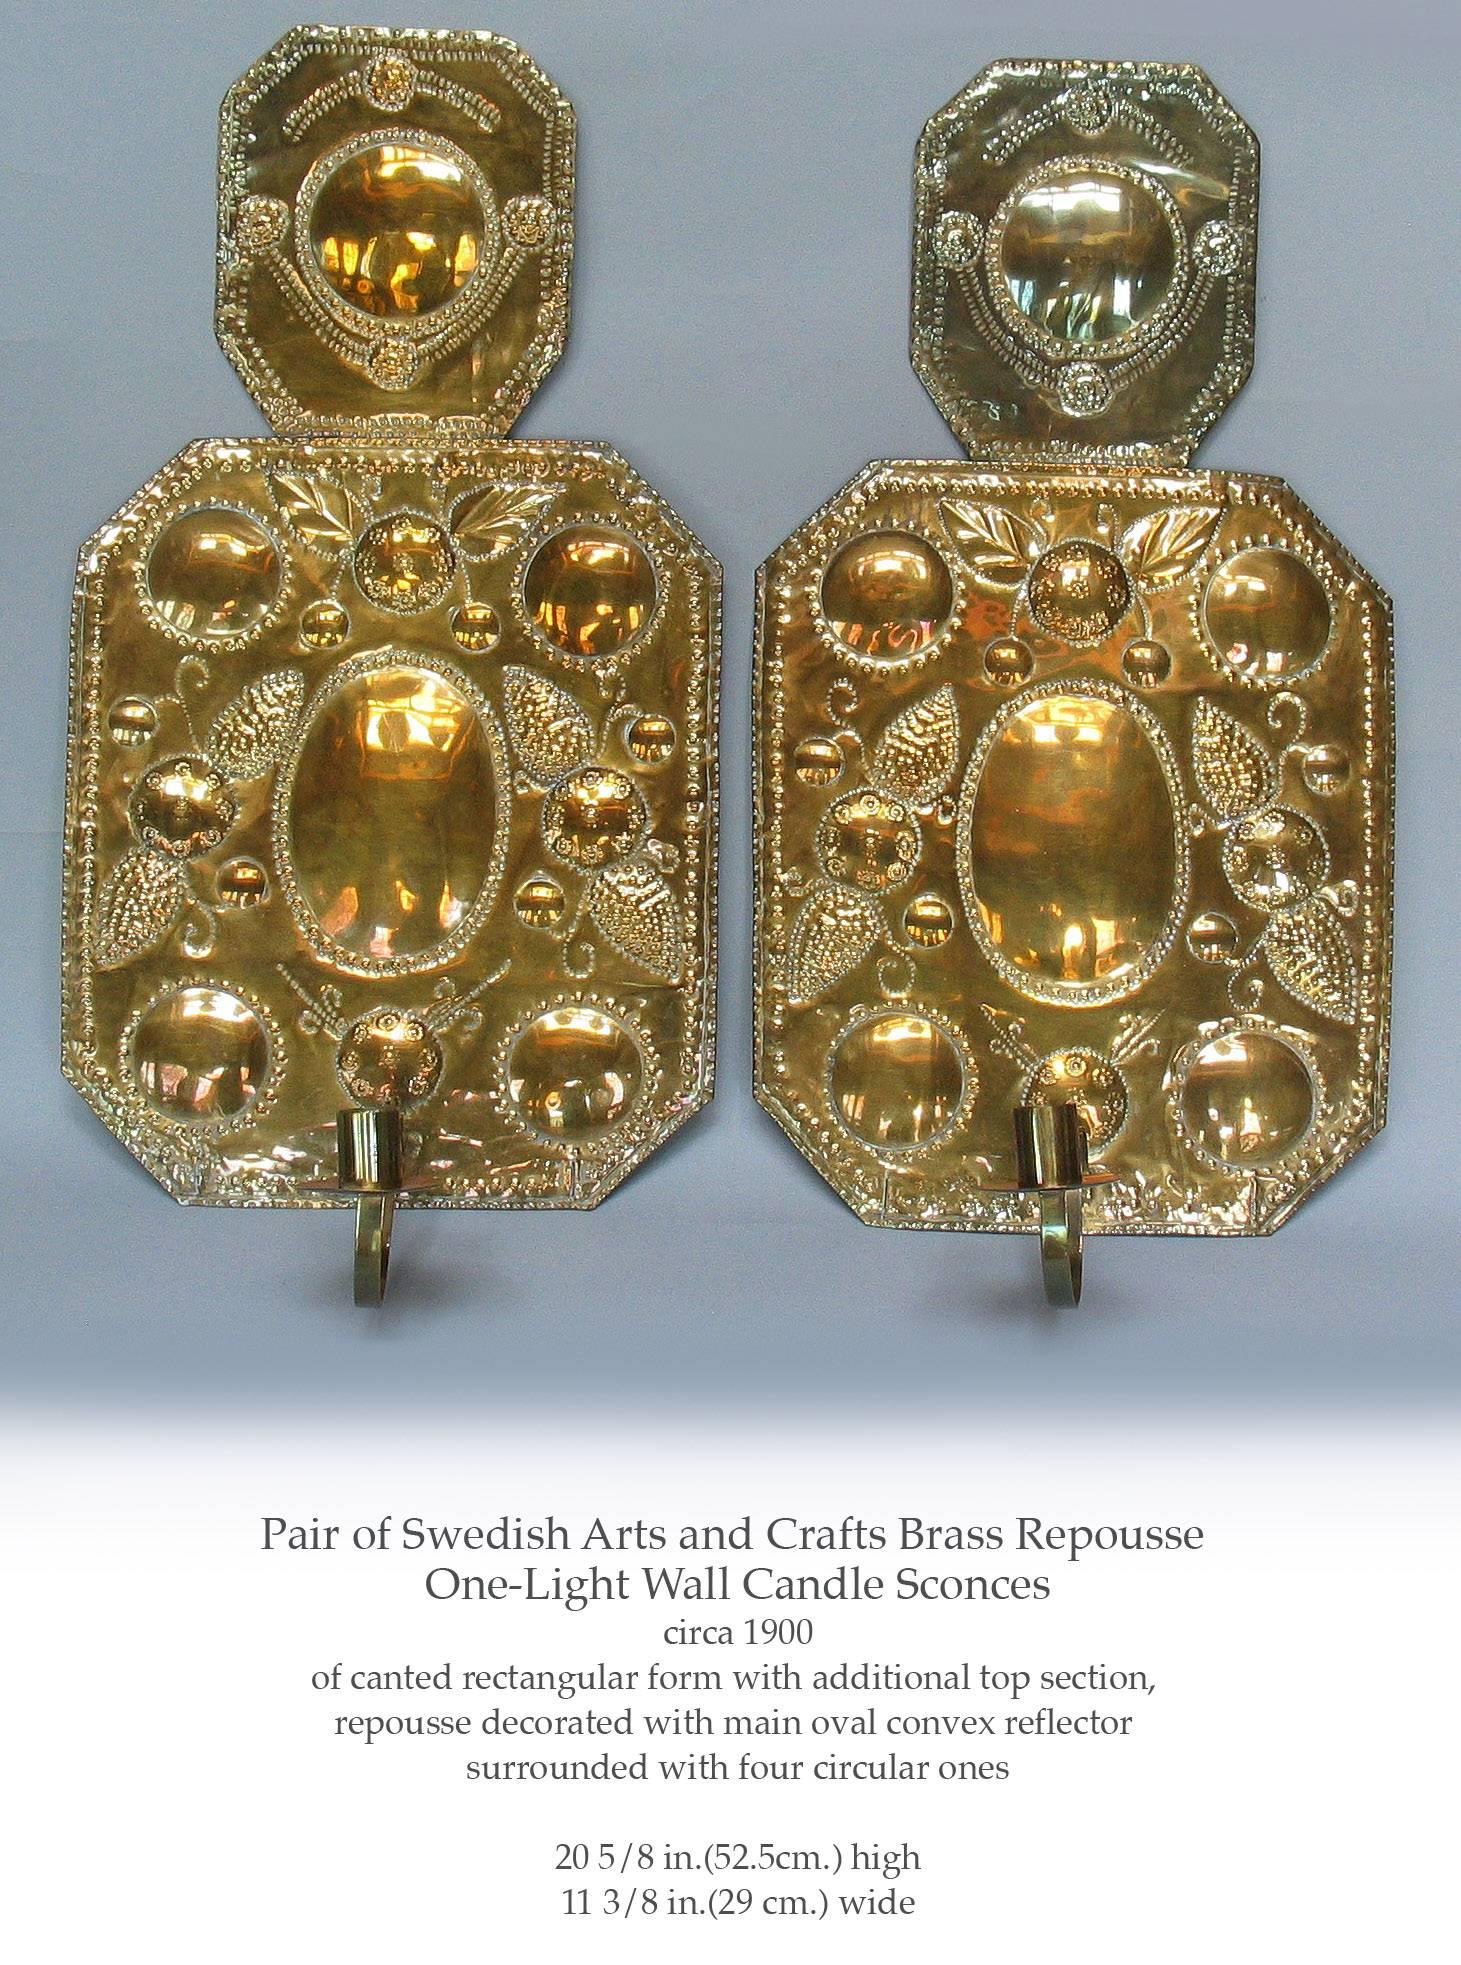 Pair of Swedish Arts & Crafts brass repoussé one light wall candle sconces, circa 1900, Of a canted rectangular form with additional top section, repoussé decorated with main oval convex reflector, surrounded with four smaller circular ones. The